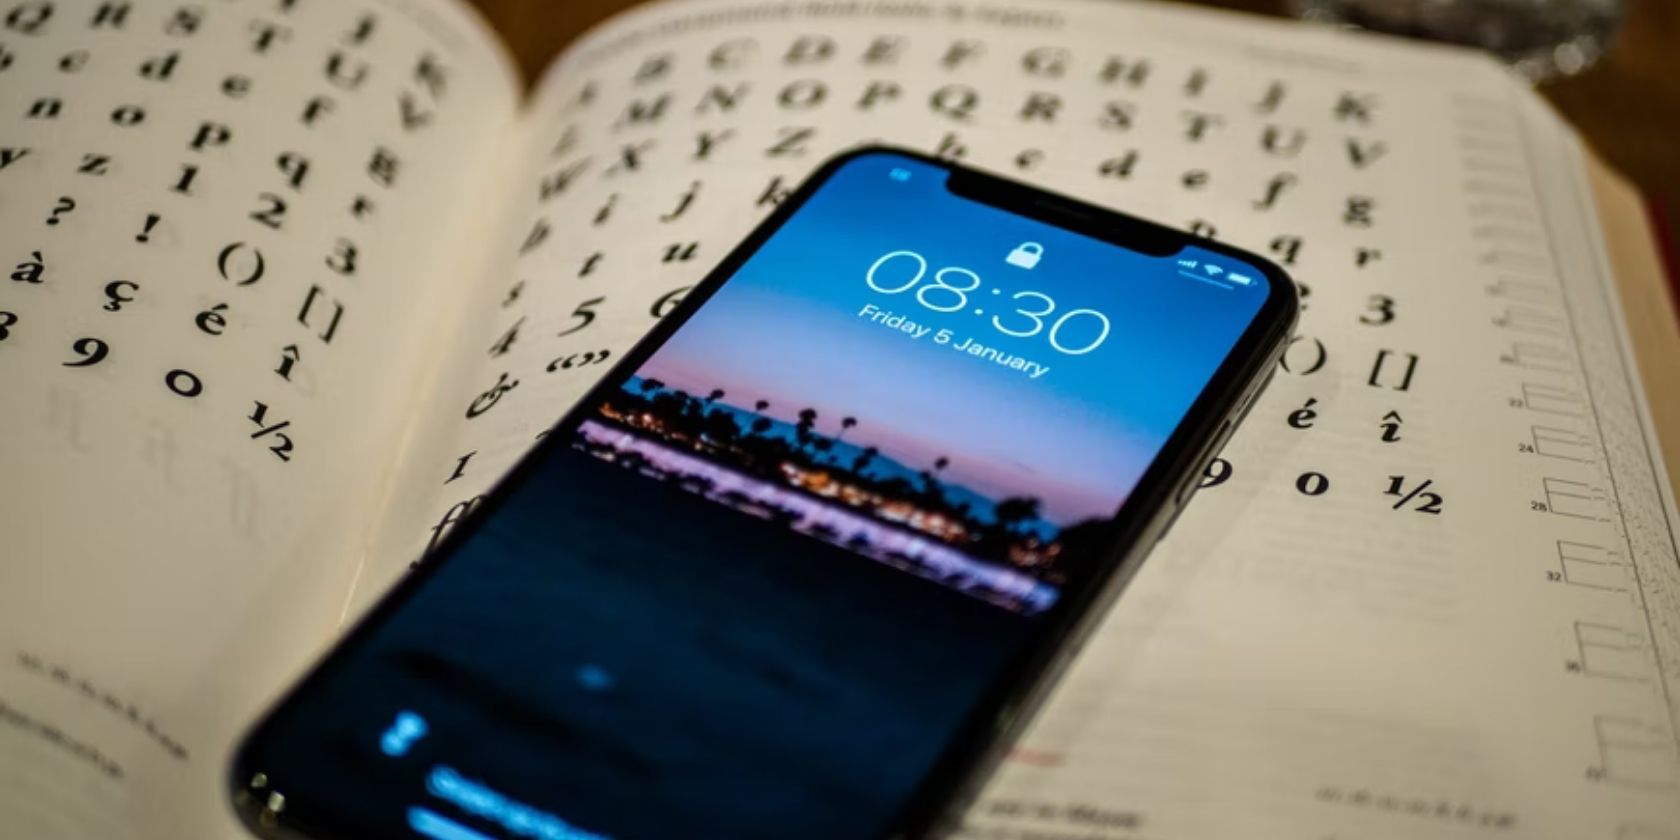 iPhone showing Lock Screen placed on book showing numbers and letters